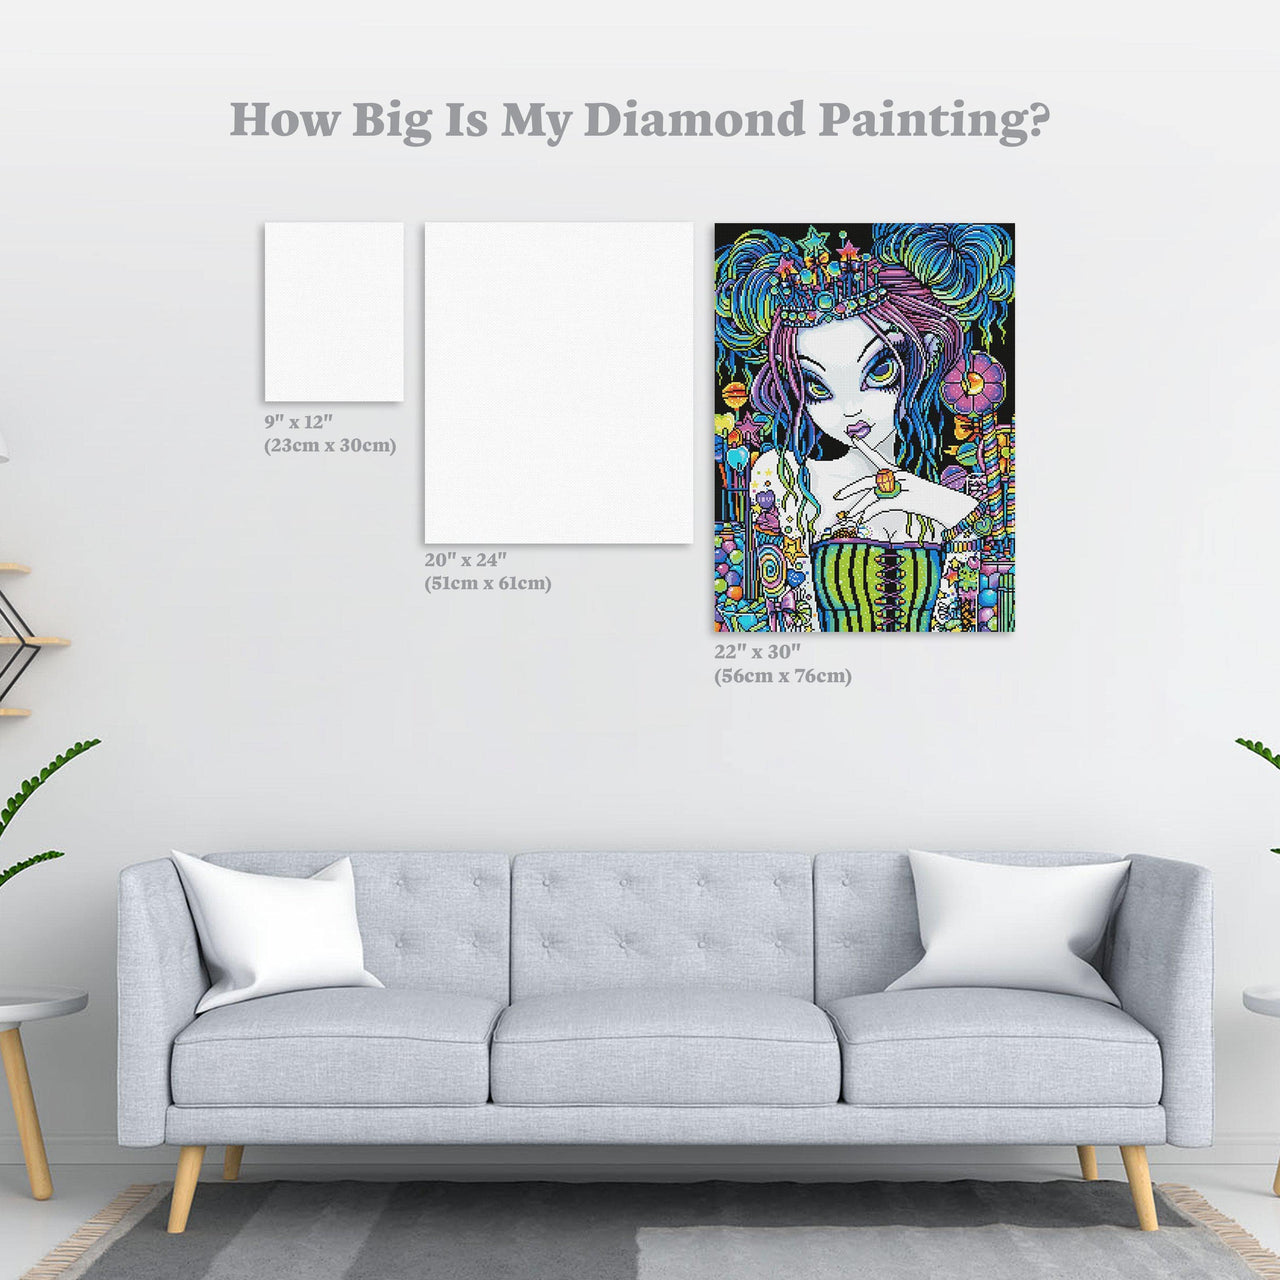 Diamond Painting Sweet Tooth 22" x 30″ (56cm x 76cm) / Round with 33 Colors Including 1 Glow-in-the-dark Color / 53,460